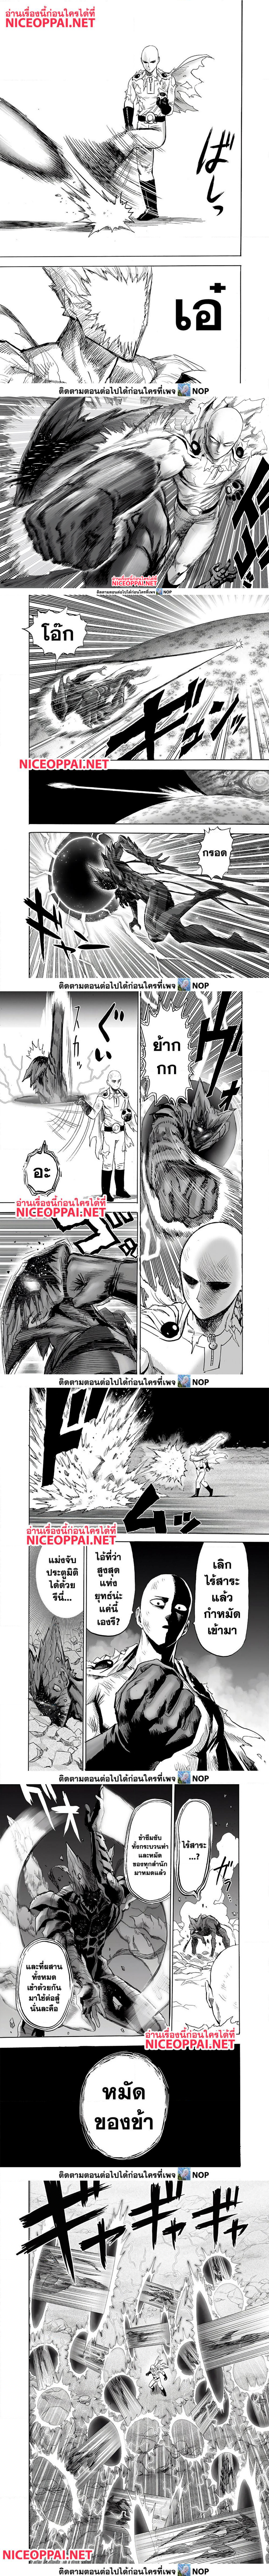 One Punch Man 167 (4)